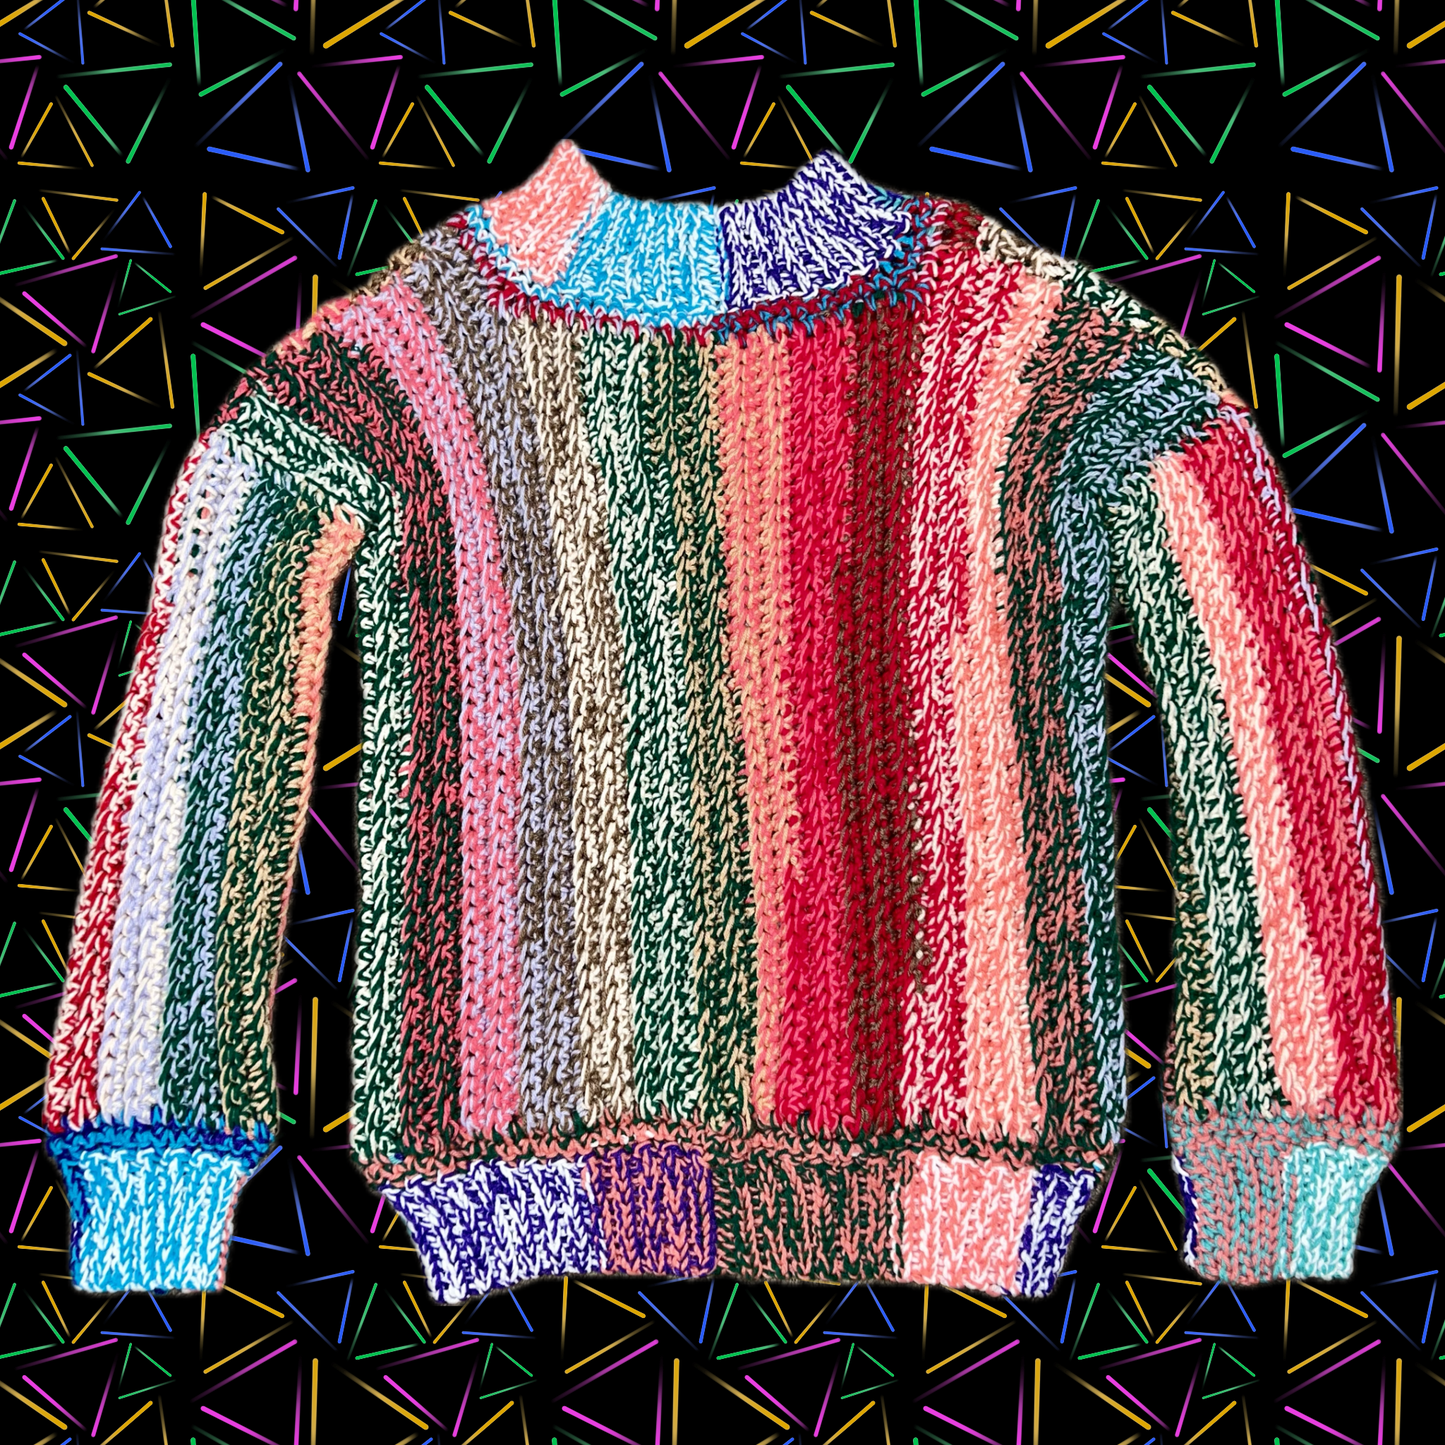 Nature is a Prism (Spectrum Sweater)